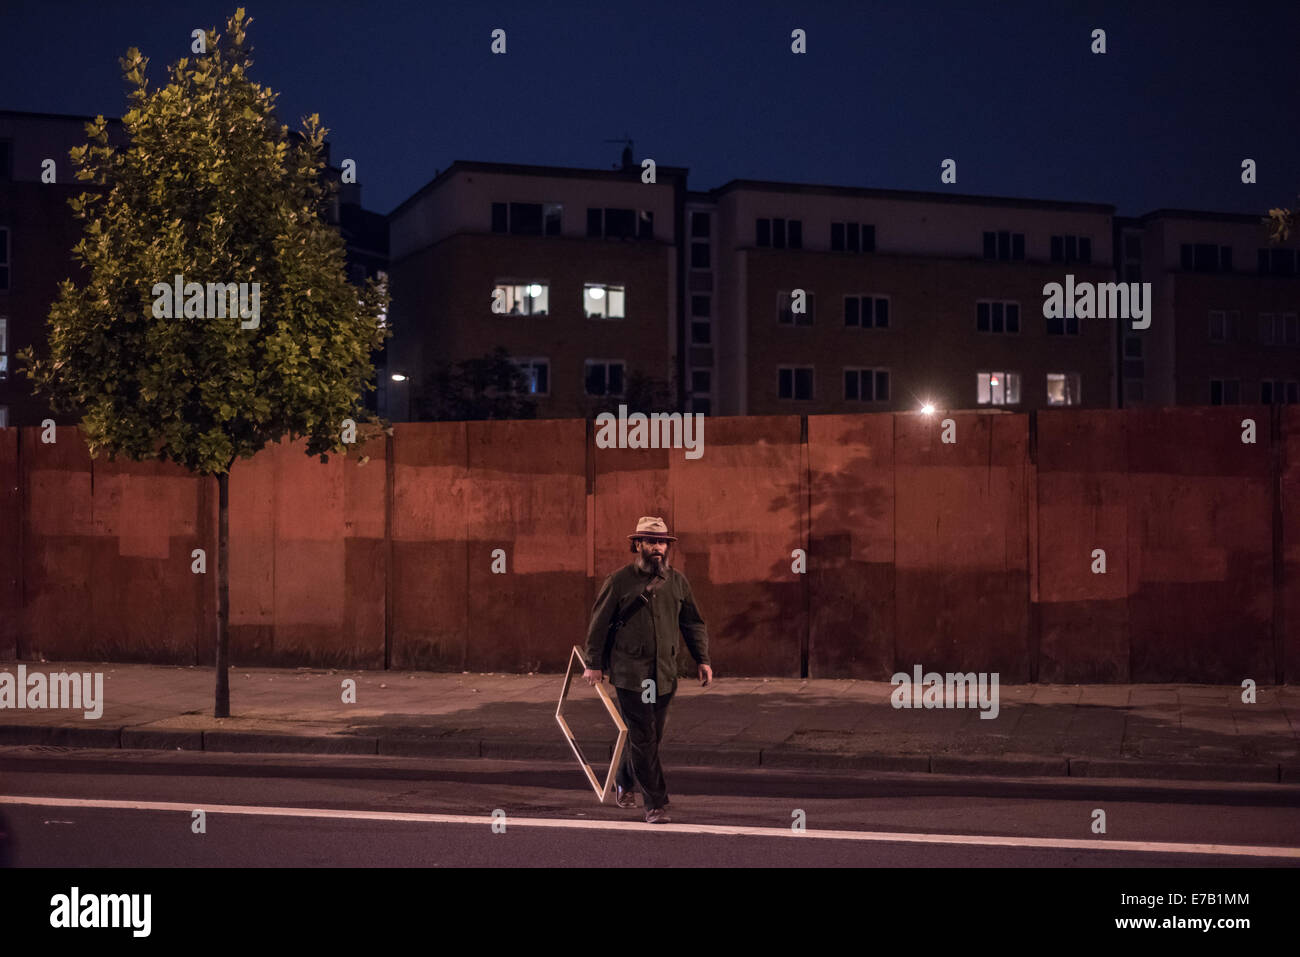 London, UK. 11 September 2014: A man holding a wooden frame crosses Kingsland Road in Dalston, North-East London. Credit:  Piero Cruciatti/Alamy Live News Stock Photo